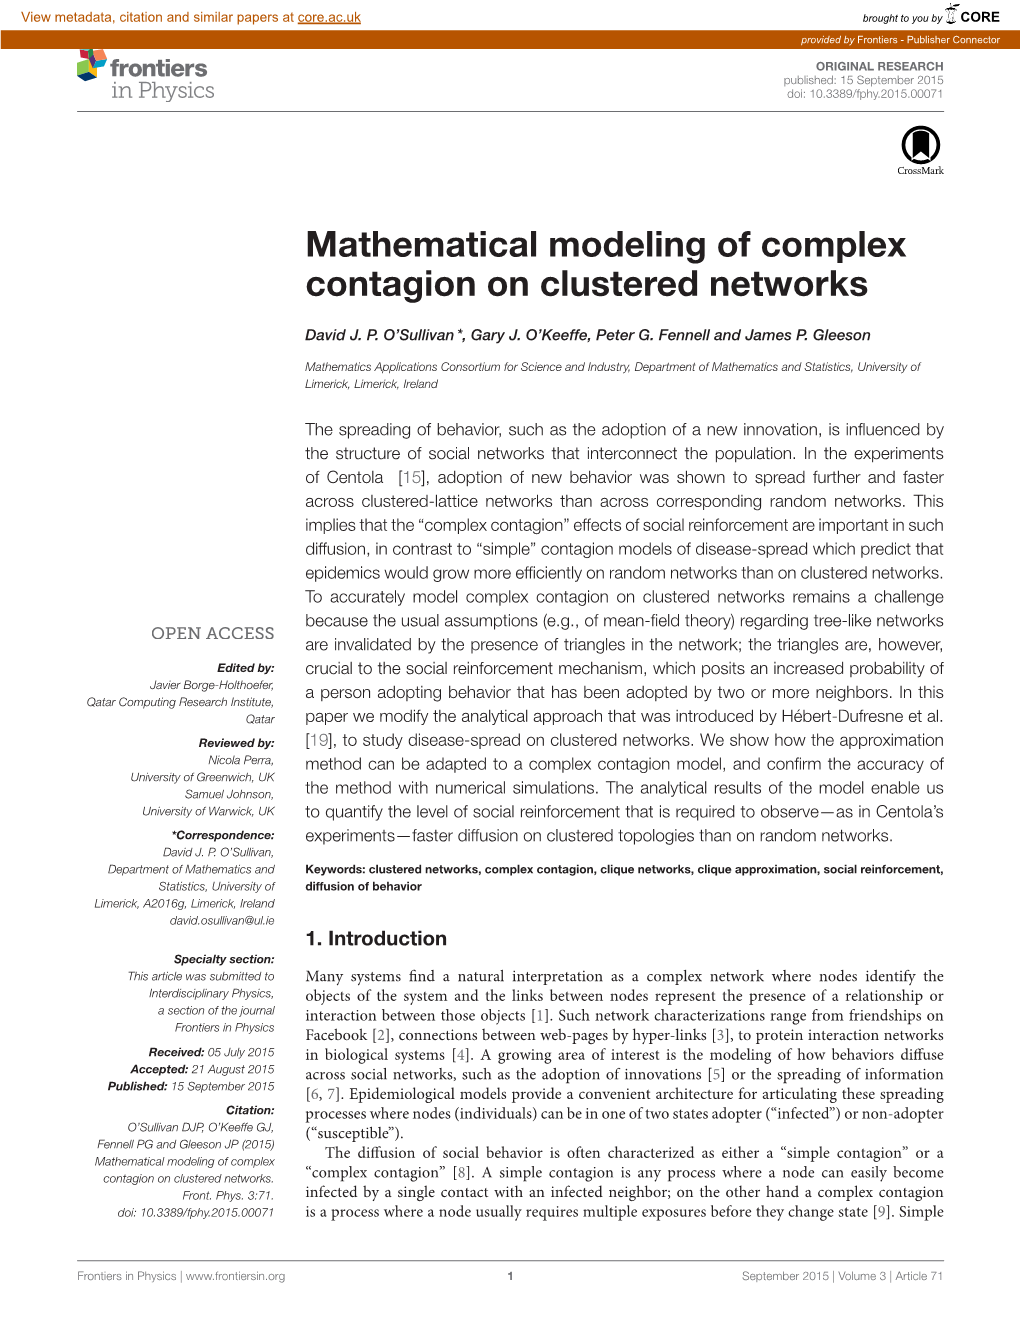 Mathematical Modeling of Complex Contagion on Clustered Networks